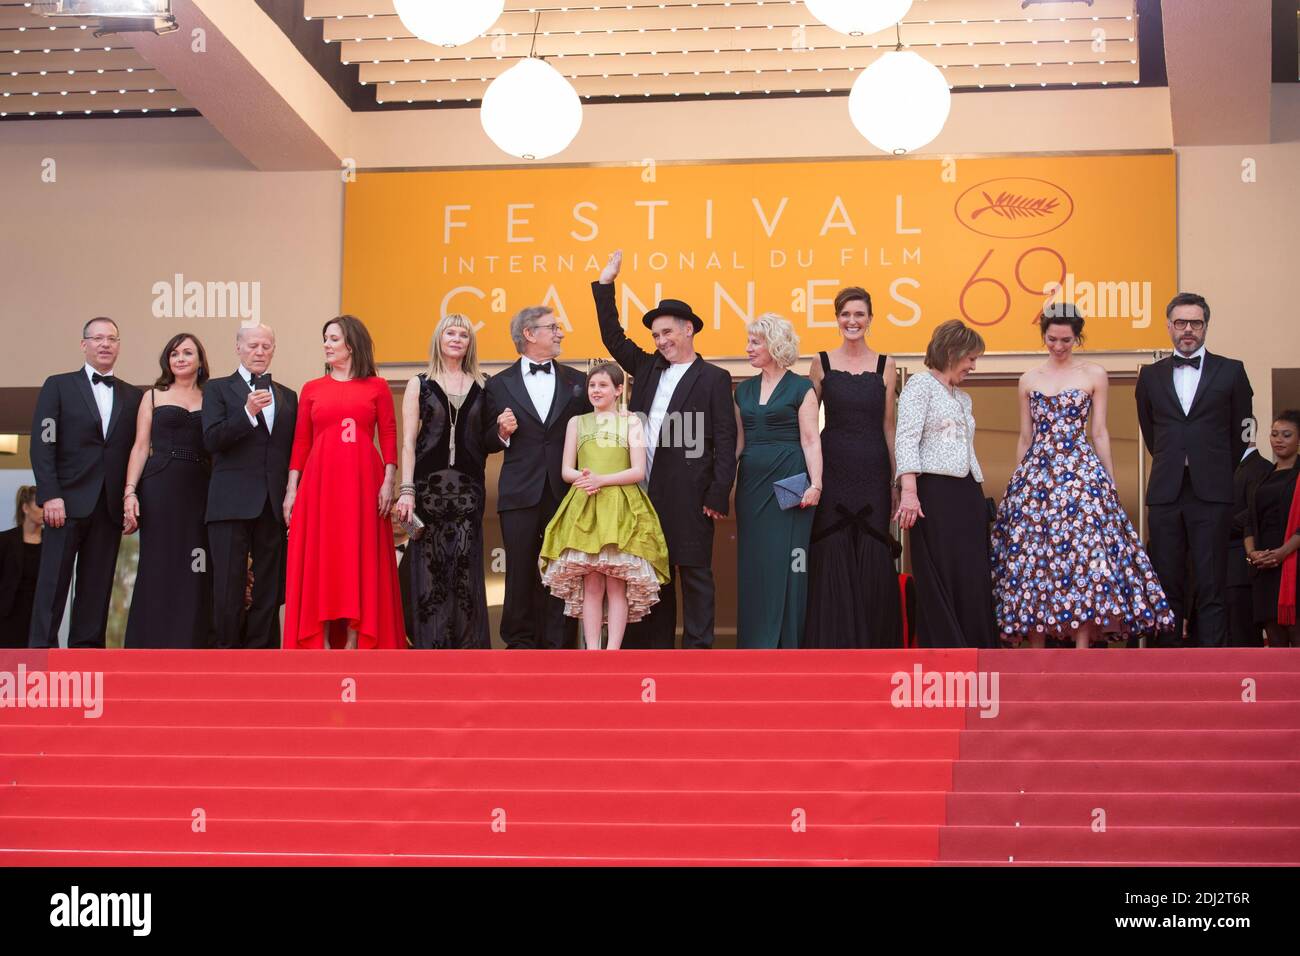 Frank Marshall, Kathleen Kennedy, Kate Capshaw, Steven Spielberg, Ruby Barnhill, Mark Rylance, Claire van Kampen, Lucy Dahl, Penelope Wilton and Jemaine Clement - CANNES 2016 - MONTEE DU FILM 'THE BFG (LE BON GROS GEANT) Photo by Nasser Berzane/ABACAPRESS.COM Stock Photo